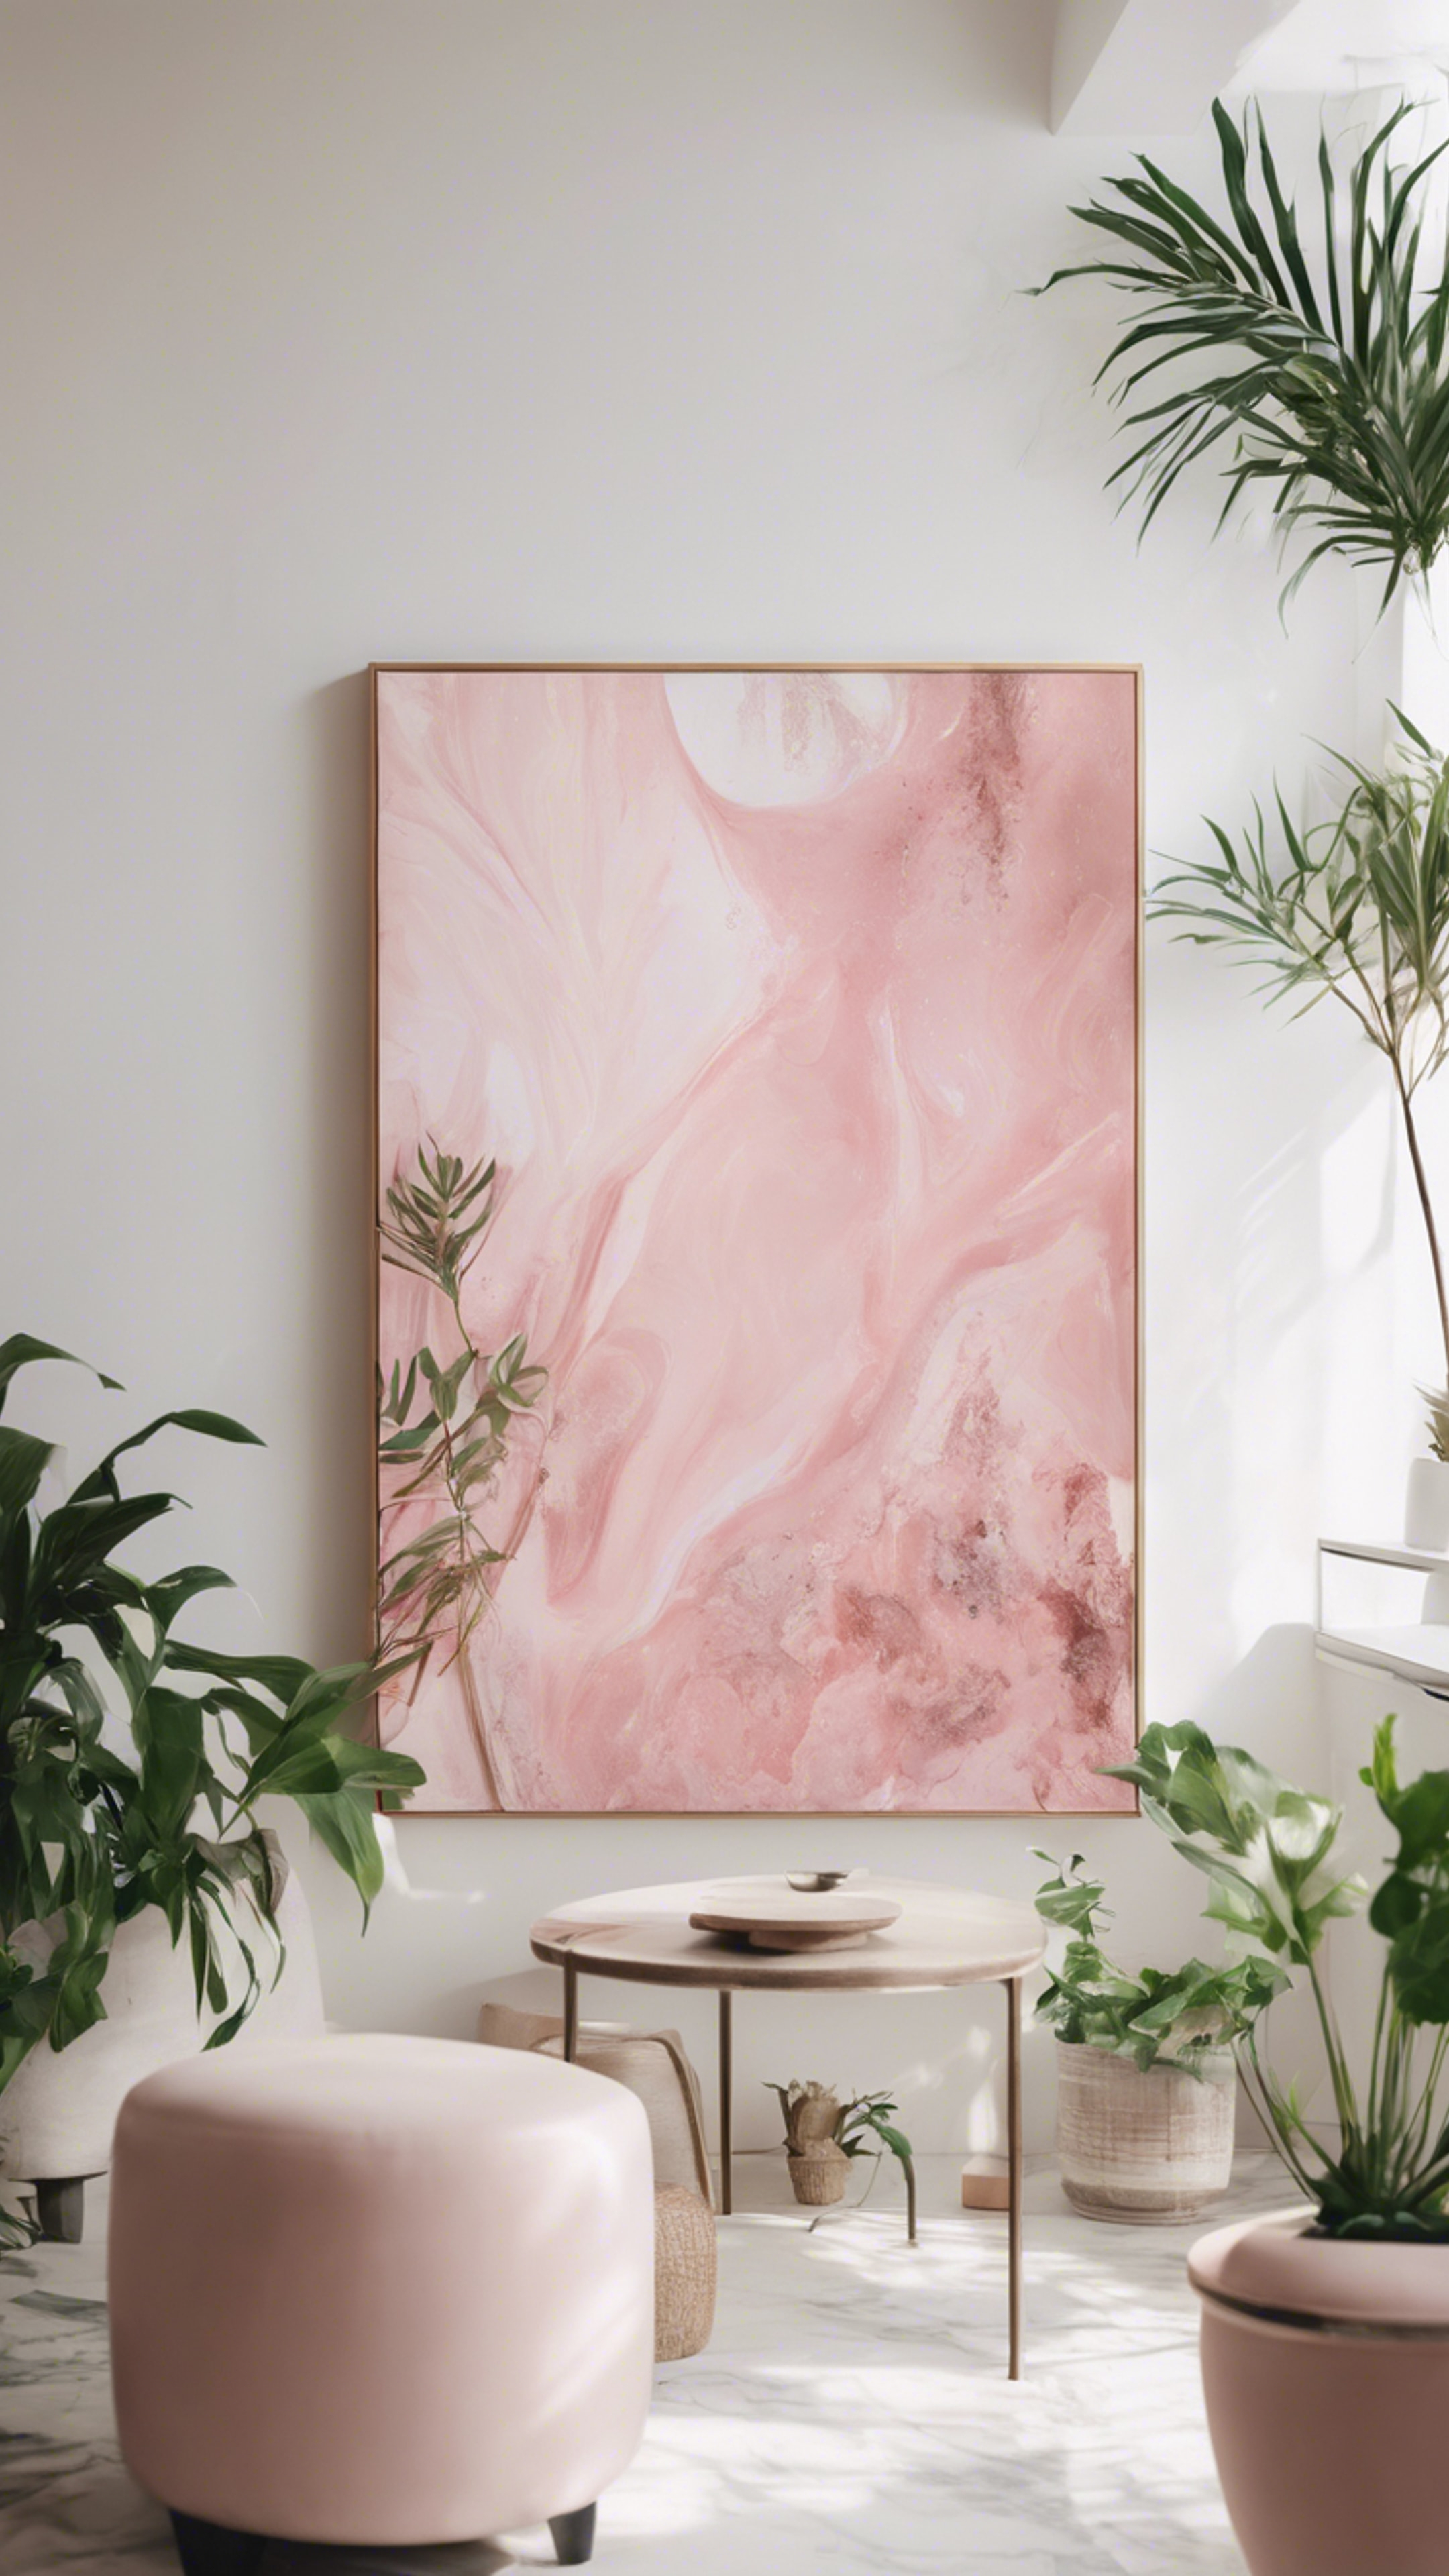 A soft pink abstract painting on a white wall surrounded by indoor plants, enhancing the aesthetic of the room Fond d'écran[9fa4f1f3650f4fbb9955]